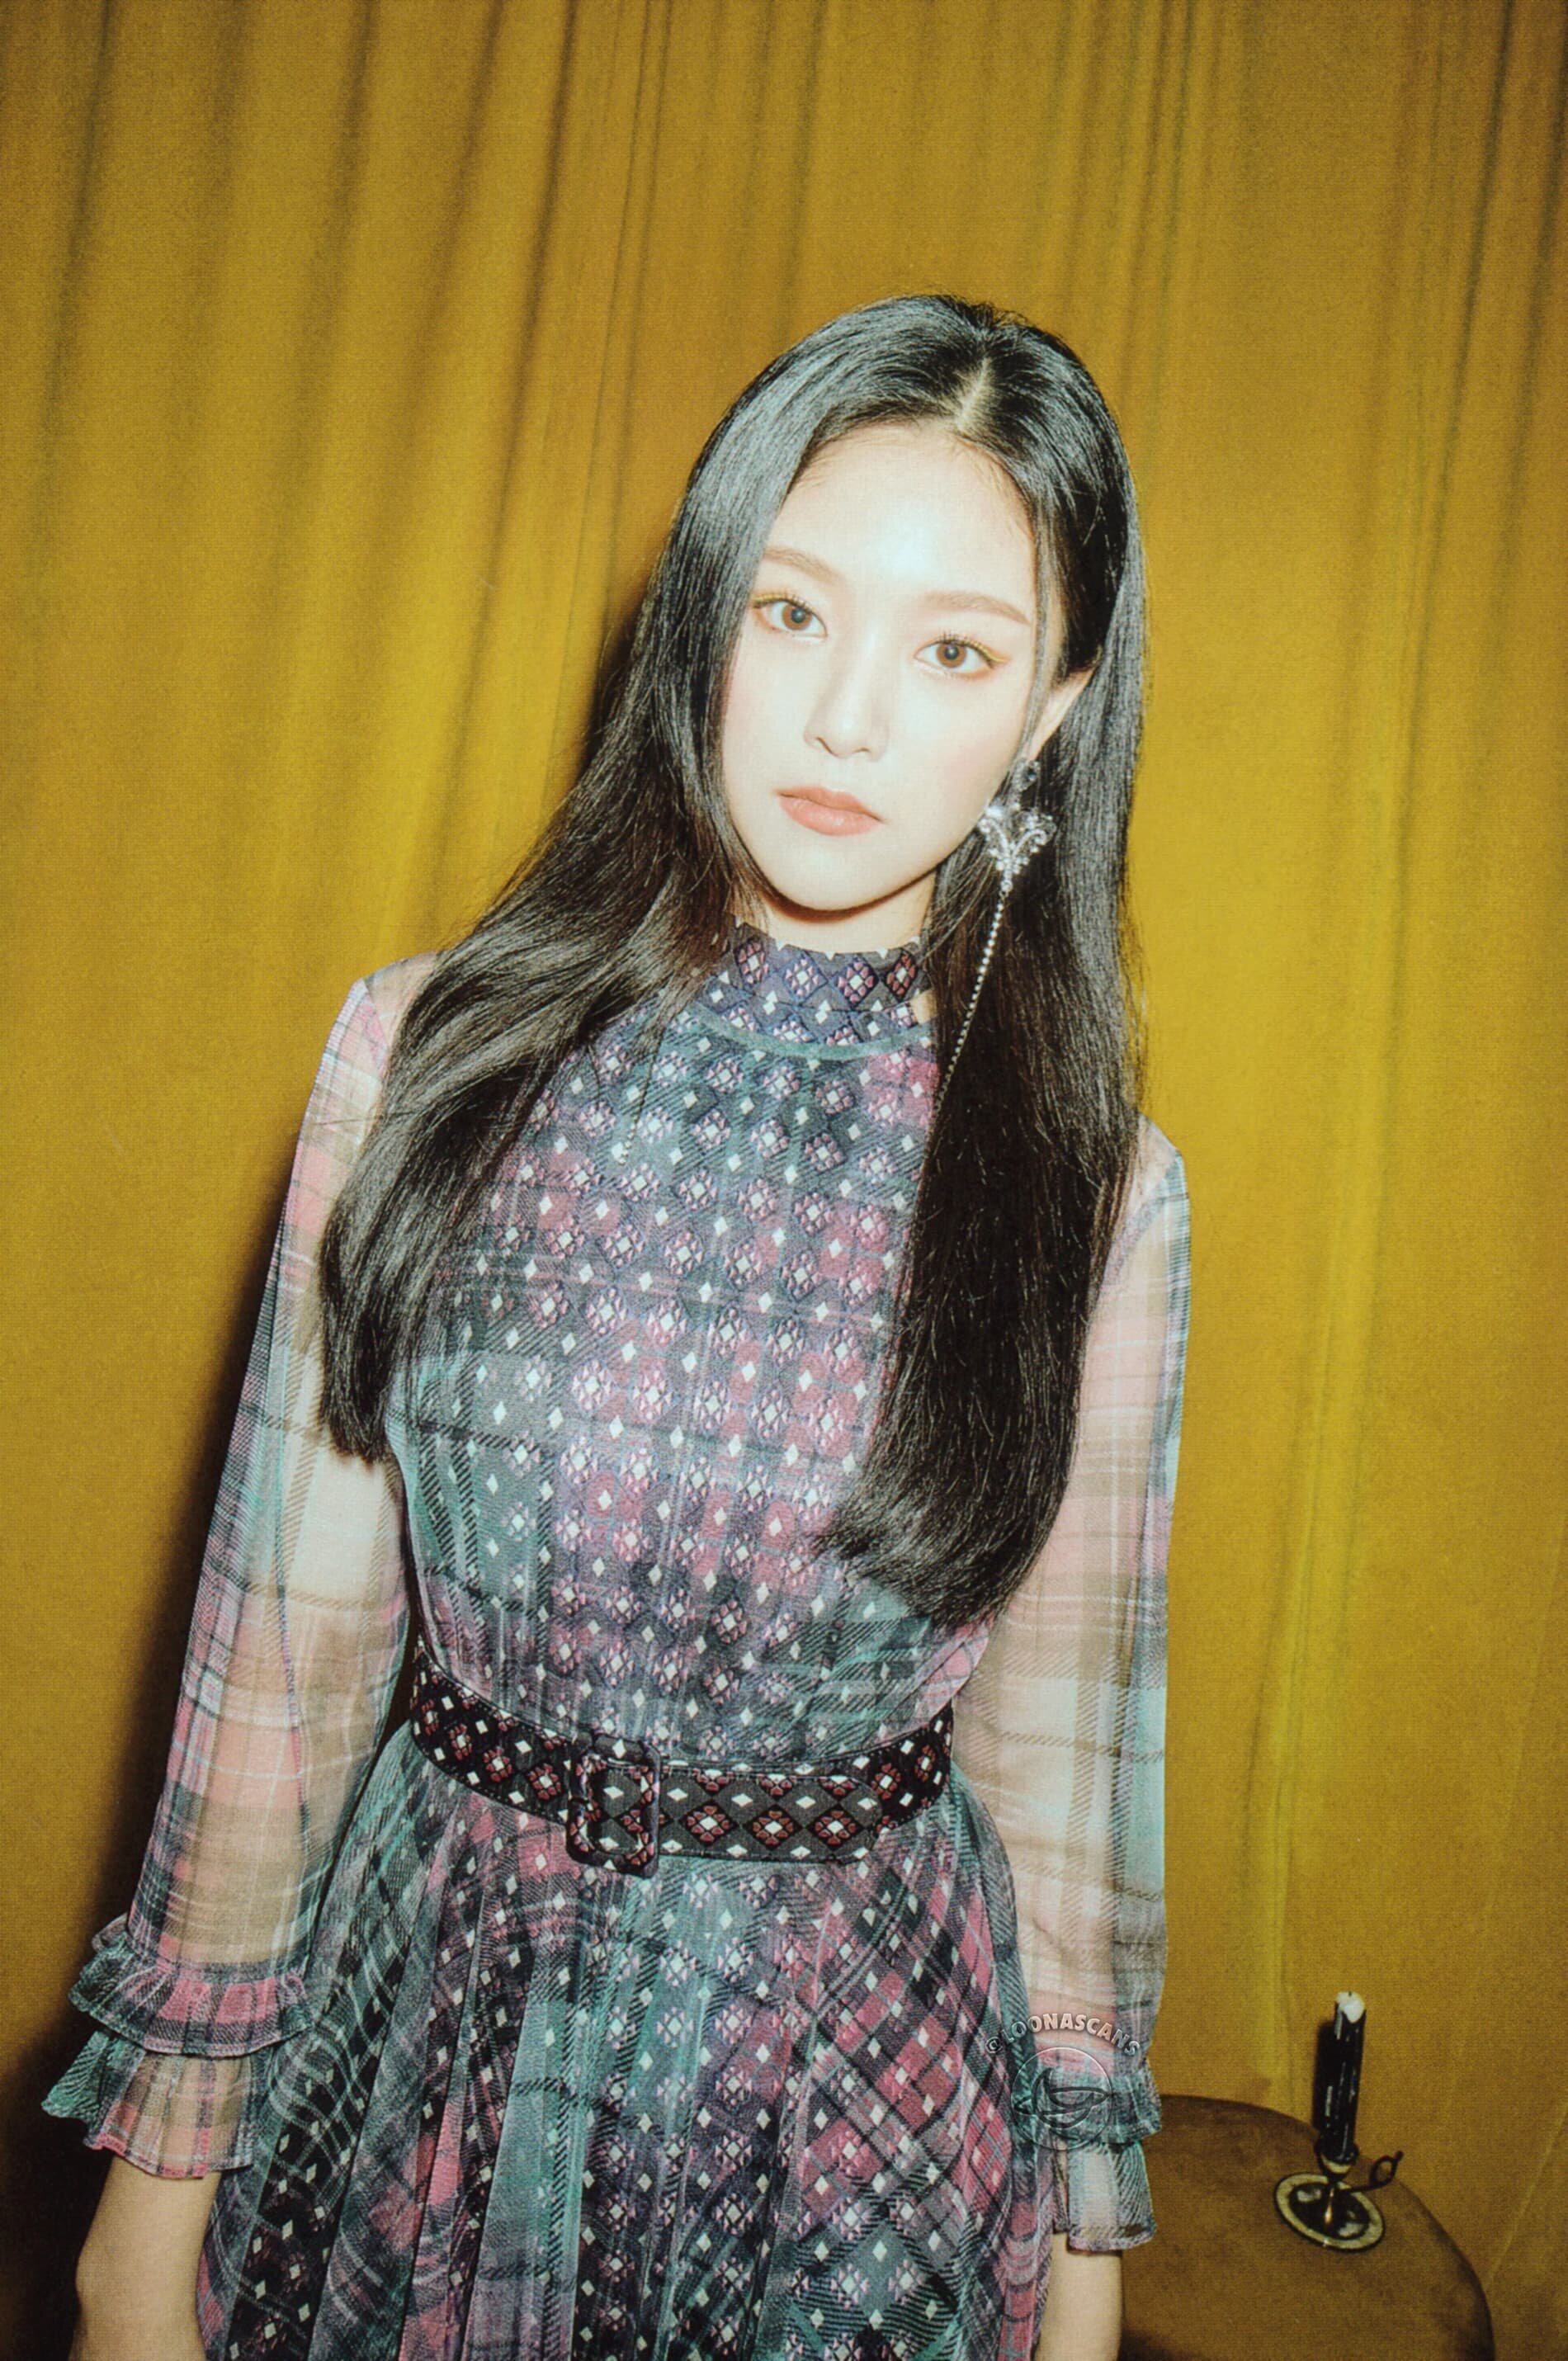 LOONA - [&] Album Scans | Kpopping